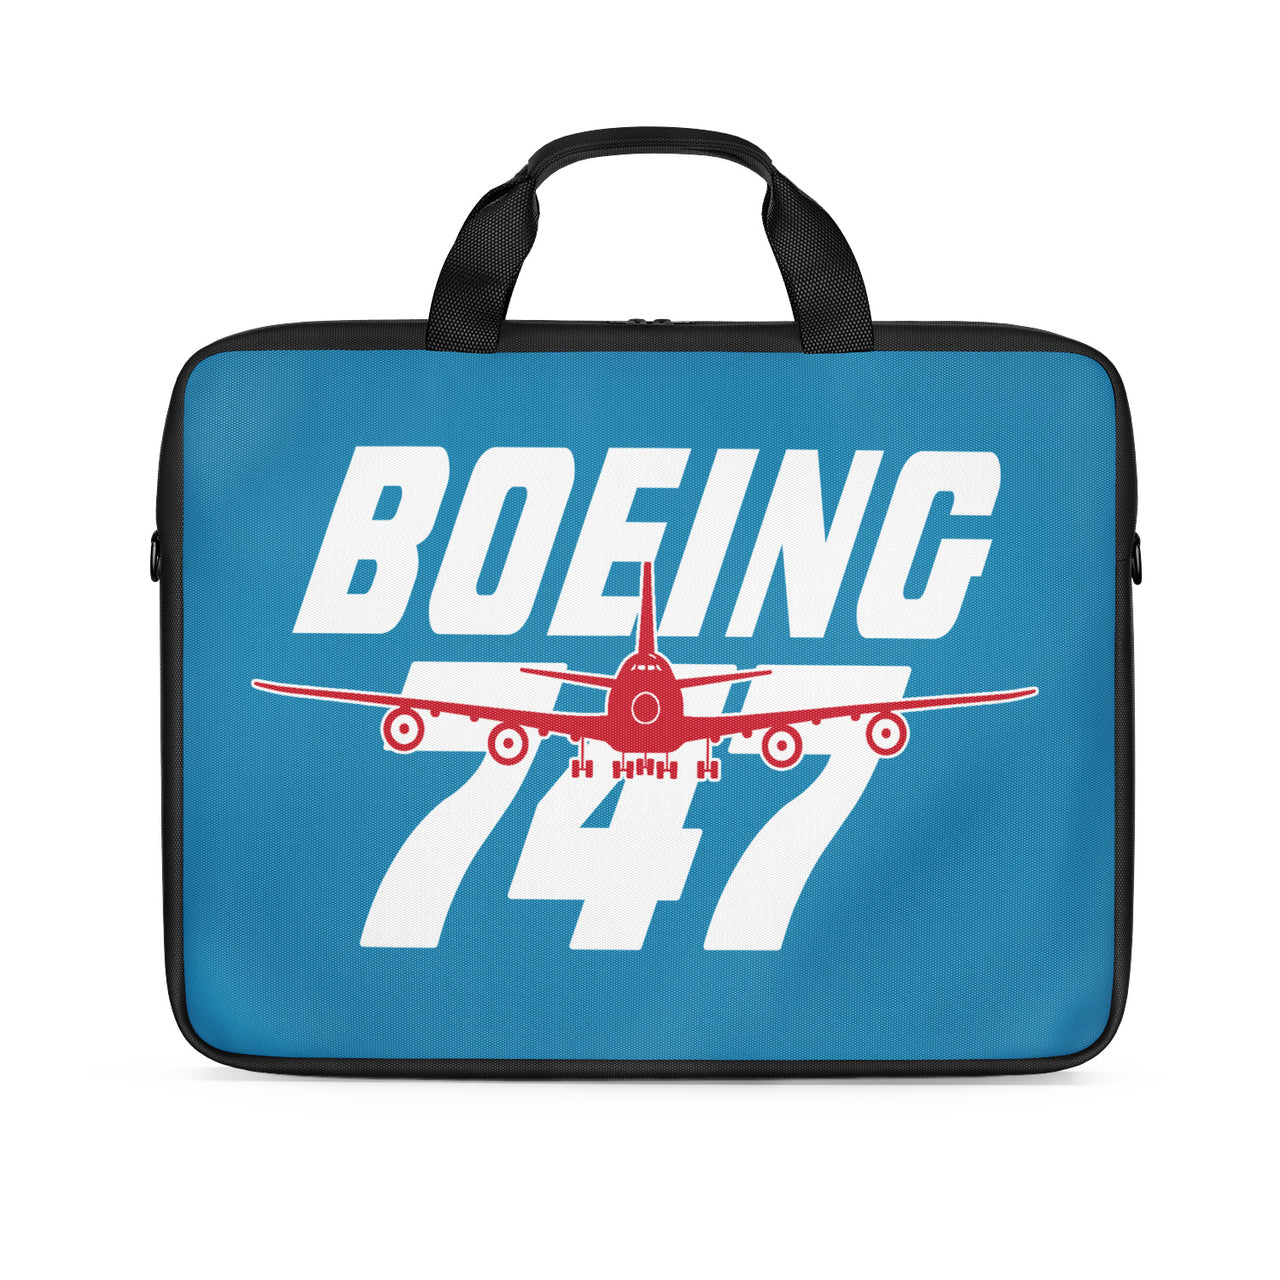 Amazing Boeing 747 Designed Laptop & Tablet Bags